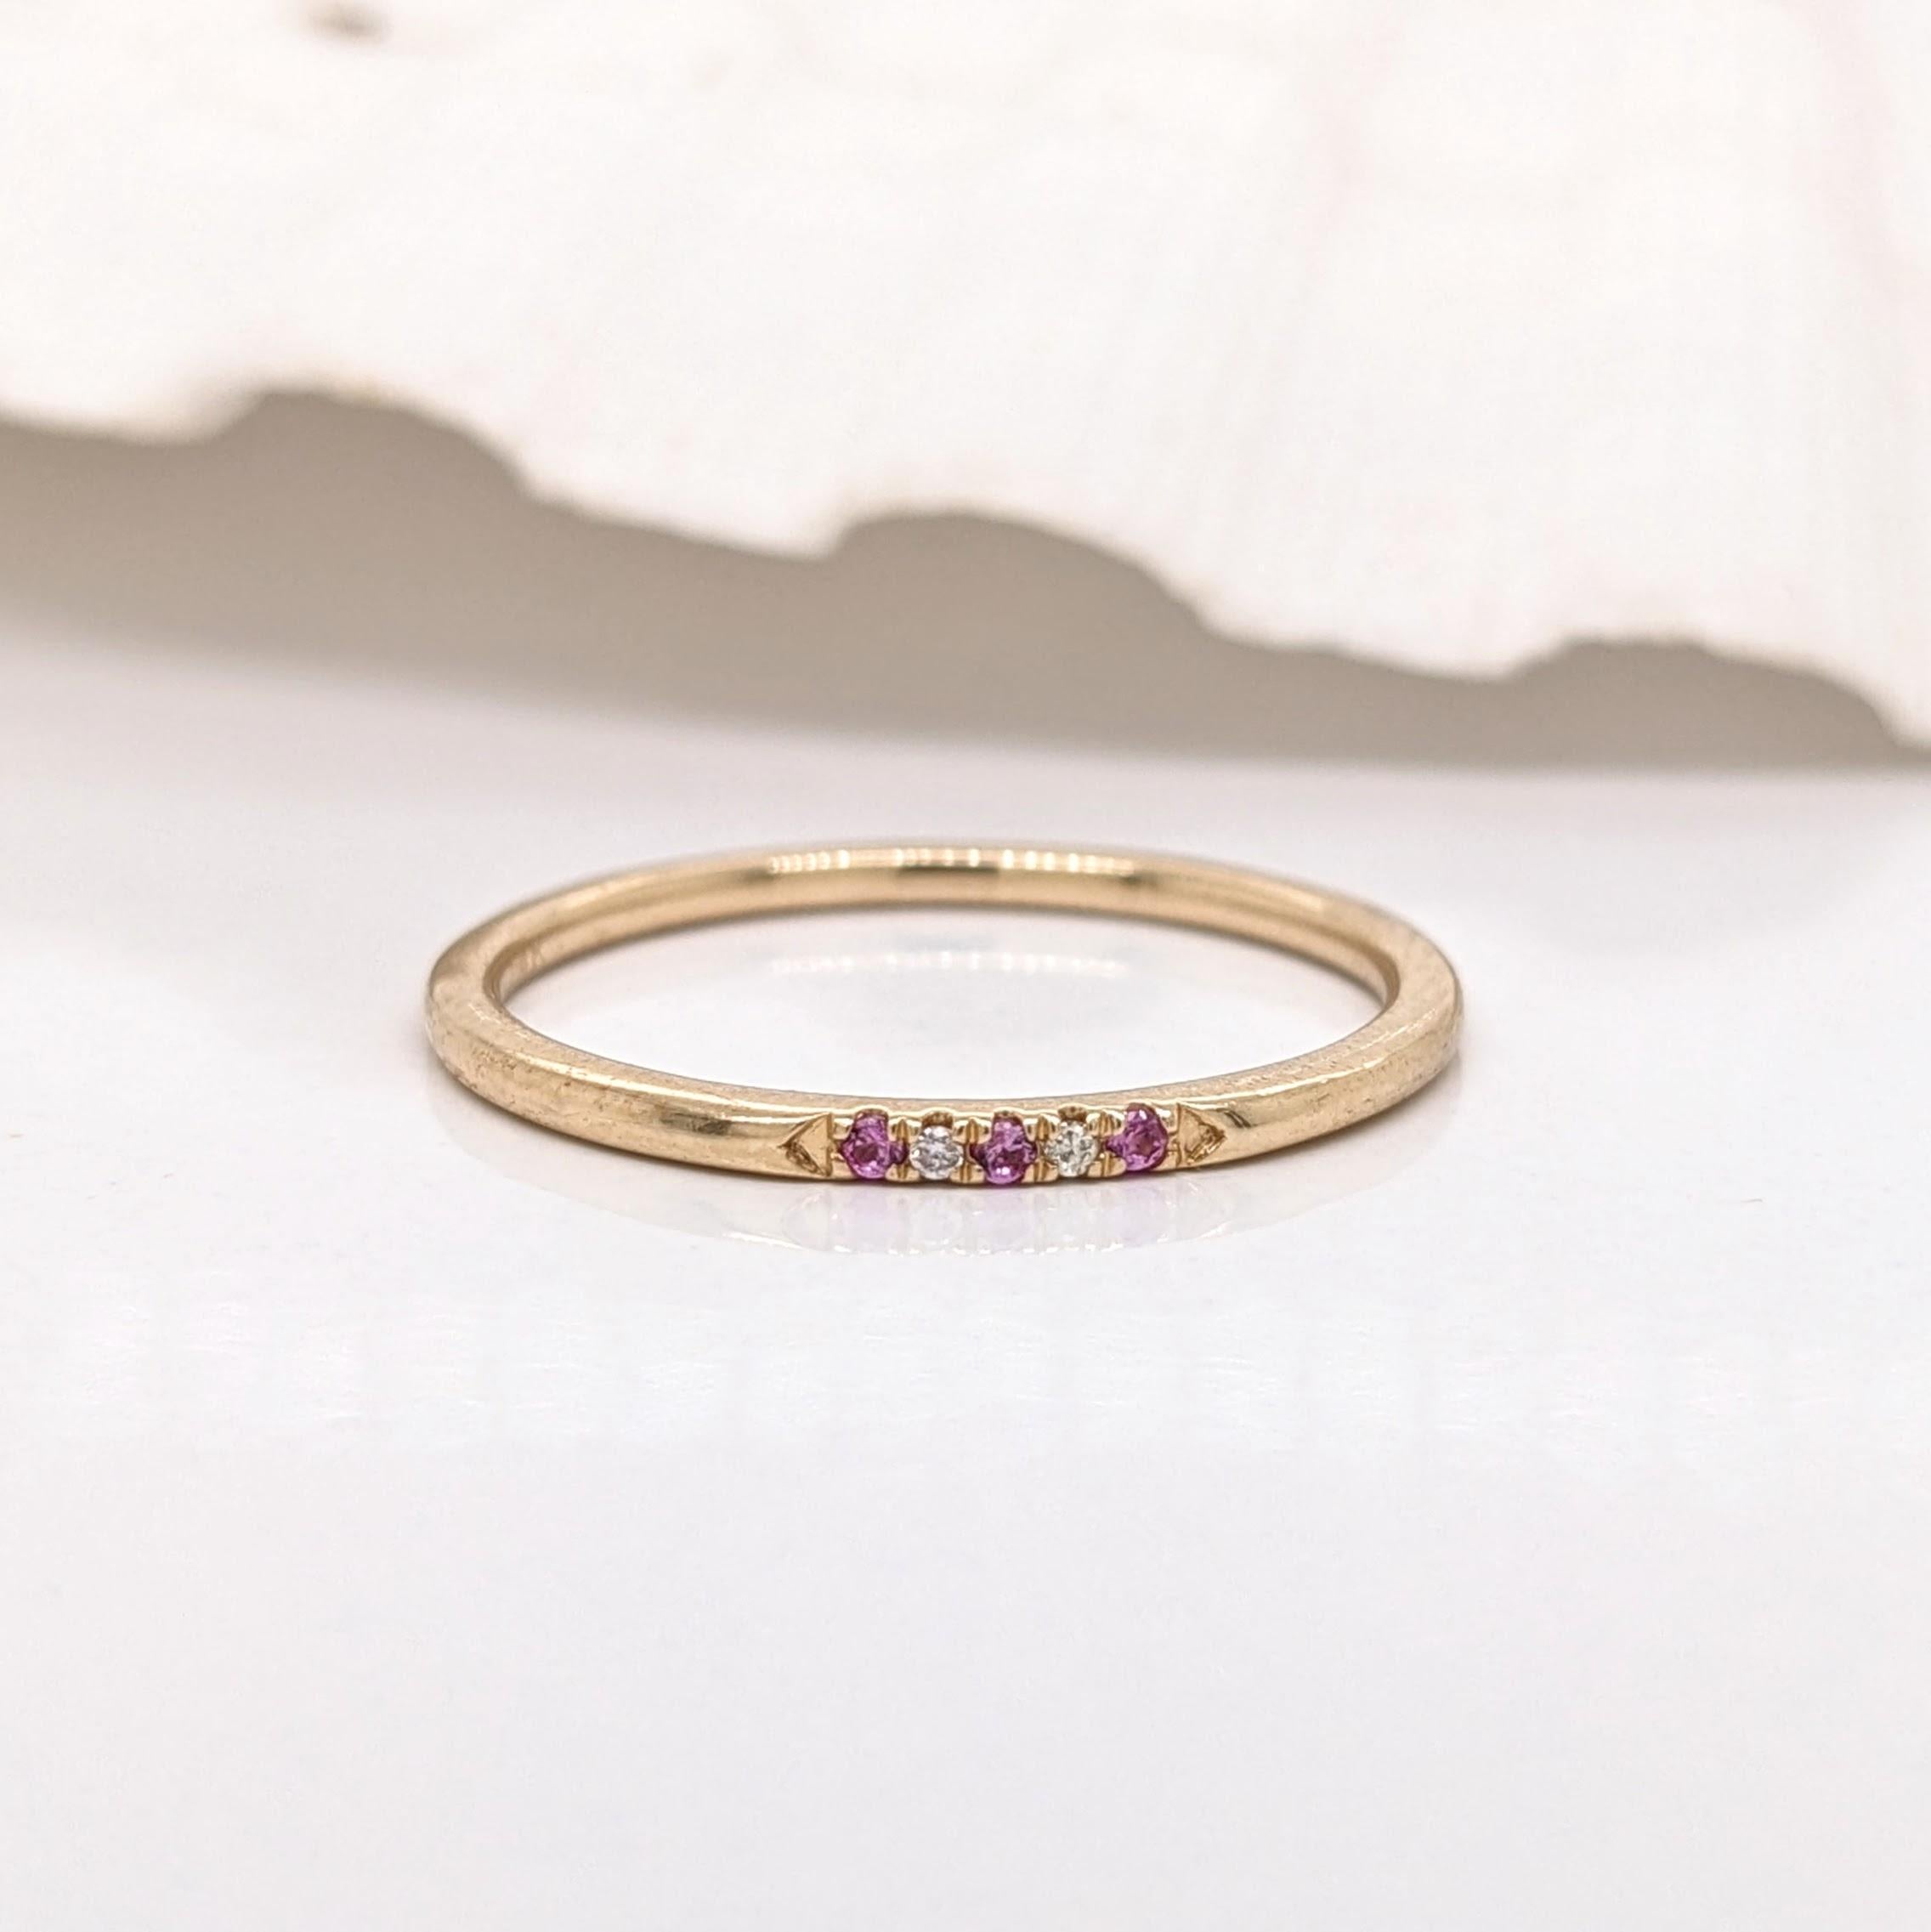 Modern Pink Sapphire Ring w Earth Mined Diamonds in Solid 14K Yellow Gold